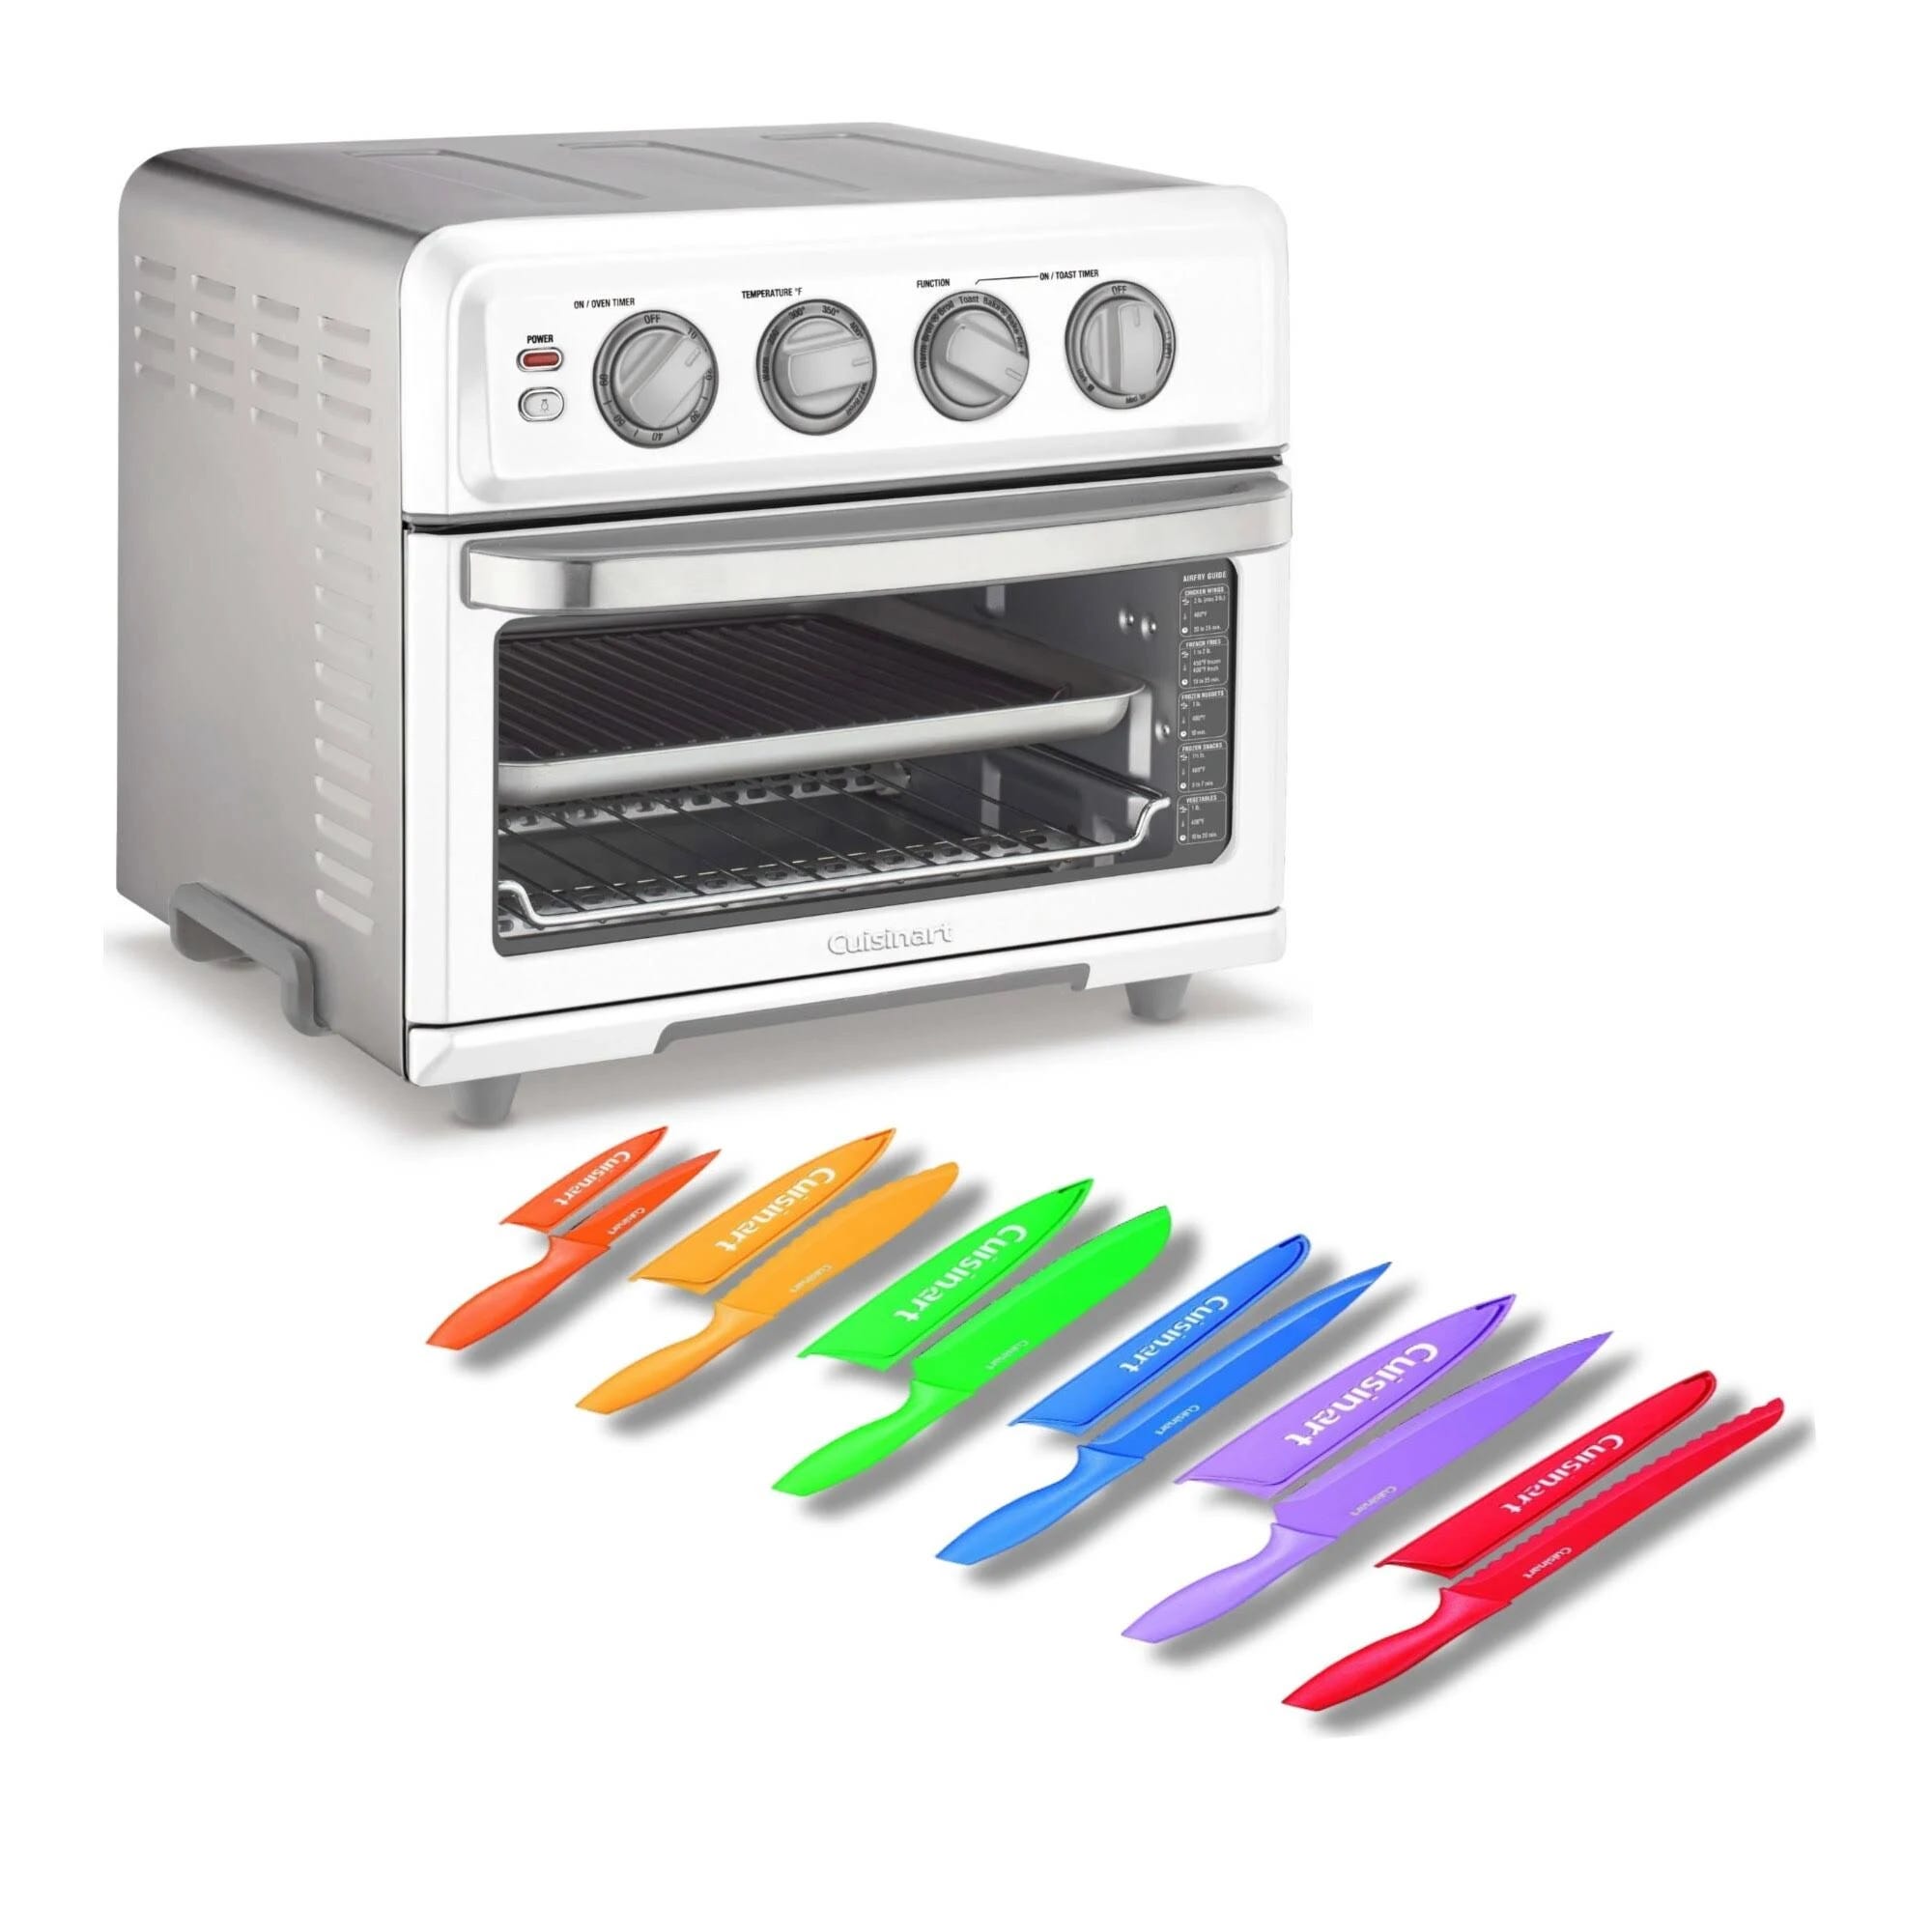 Cuisinart Airfryer Toaster Oven with Grill and 12-Piece Knife Set | Image